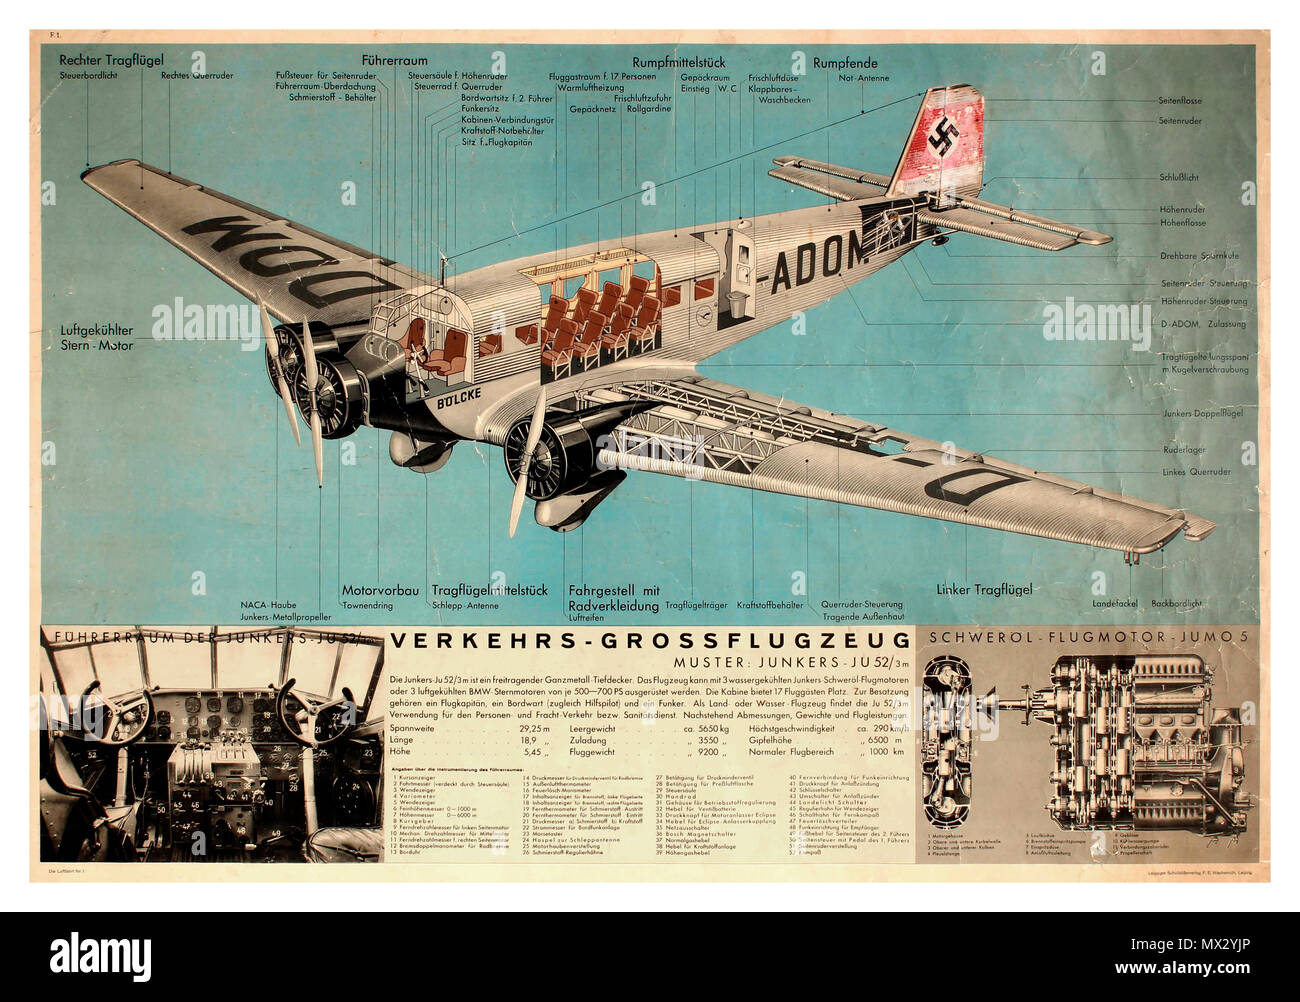 LUFTHANSA NAZI THIRD REICH JUNKERS JU 52 AIRPLANE 1930’s Germany schematic cutaway illustration of a heavy duty Junkers 52 Nazi Germany Aircraft used for passengers, freight and ambulance work during WW2 with Swastika emblem on tail fin. Stock Photo